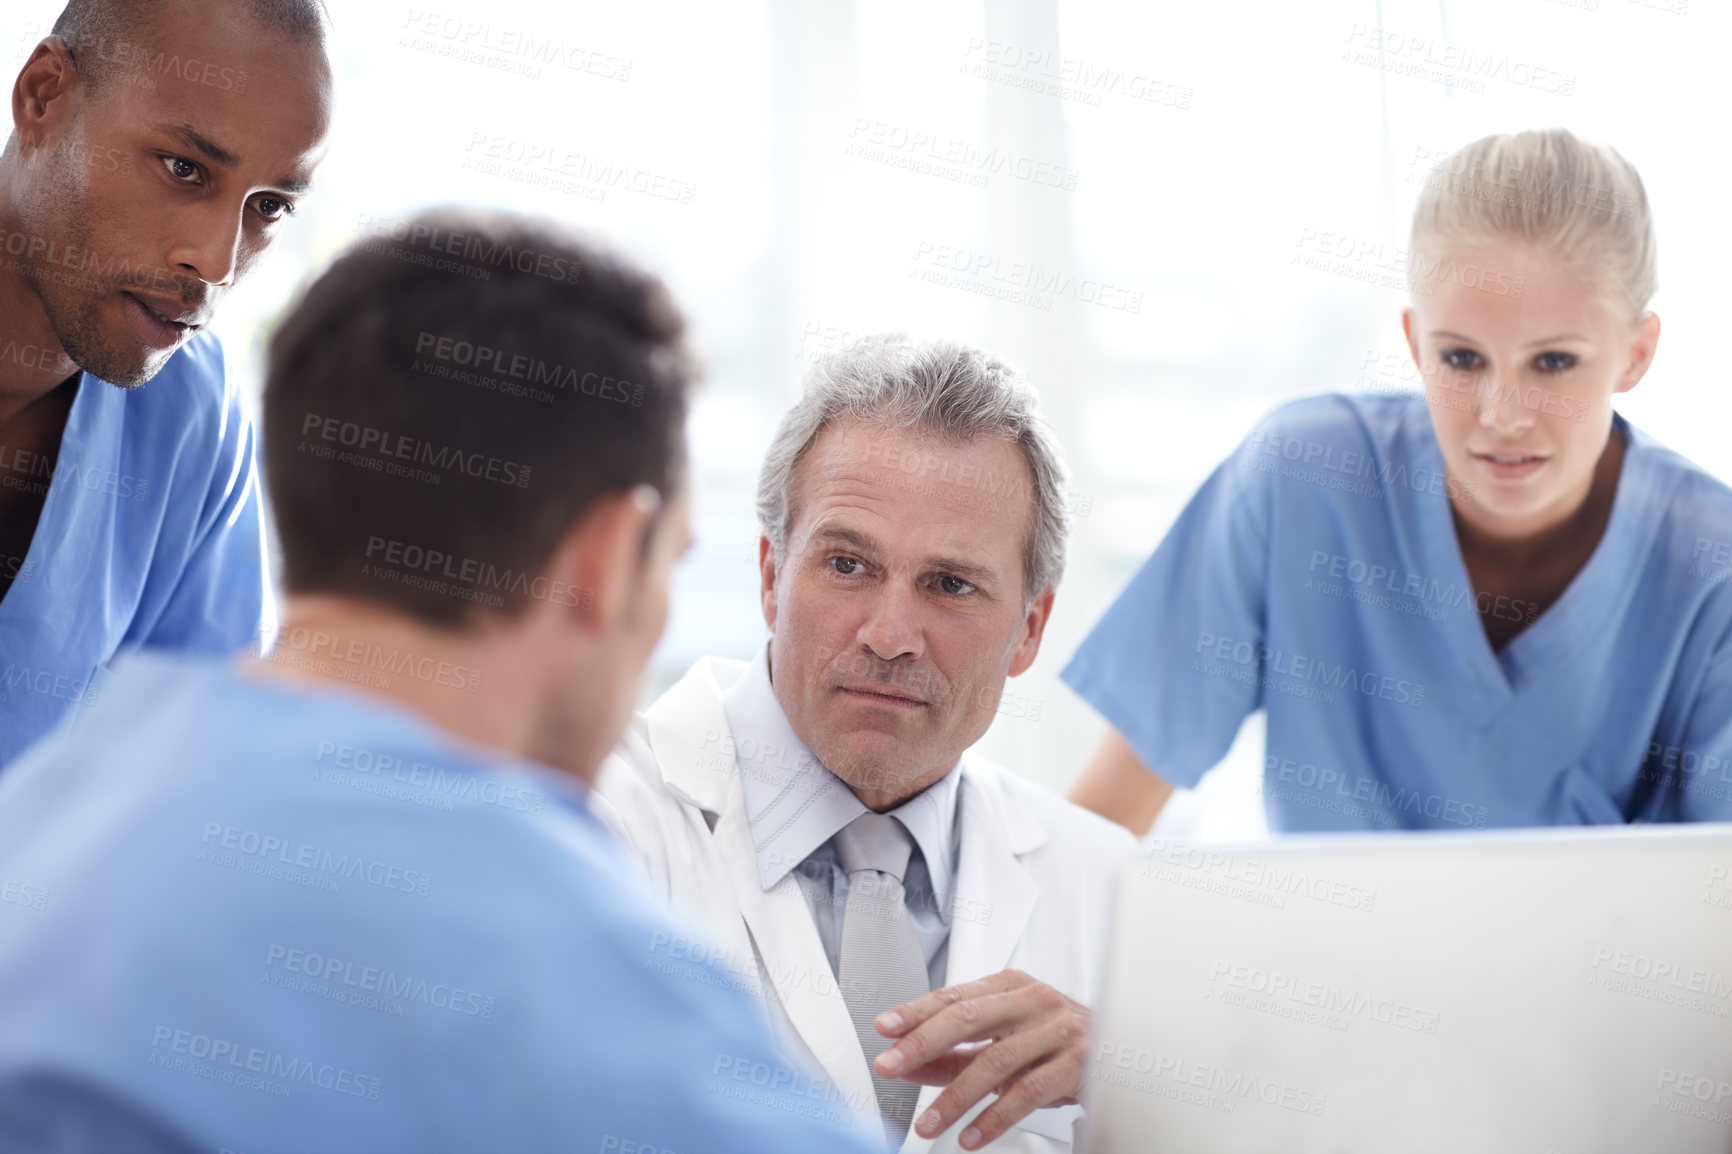 Buy stock photo A senior medical professional in conversation with colleagues